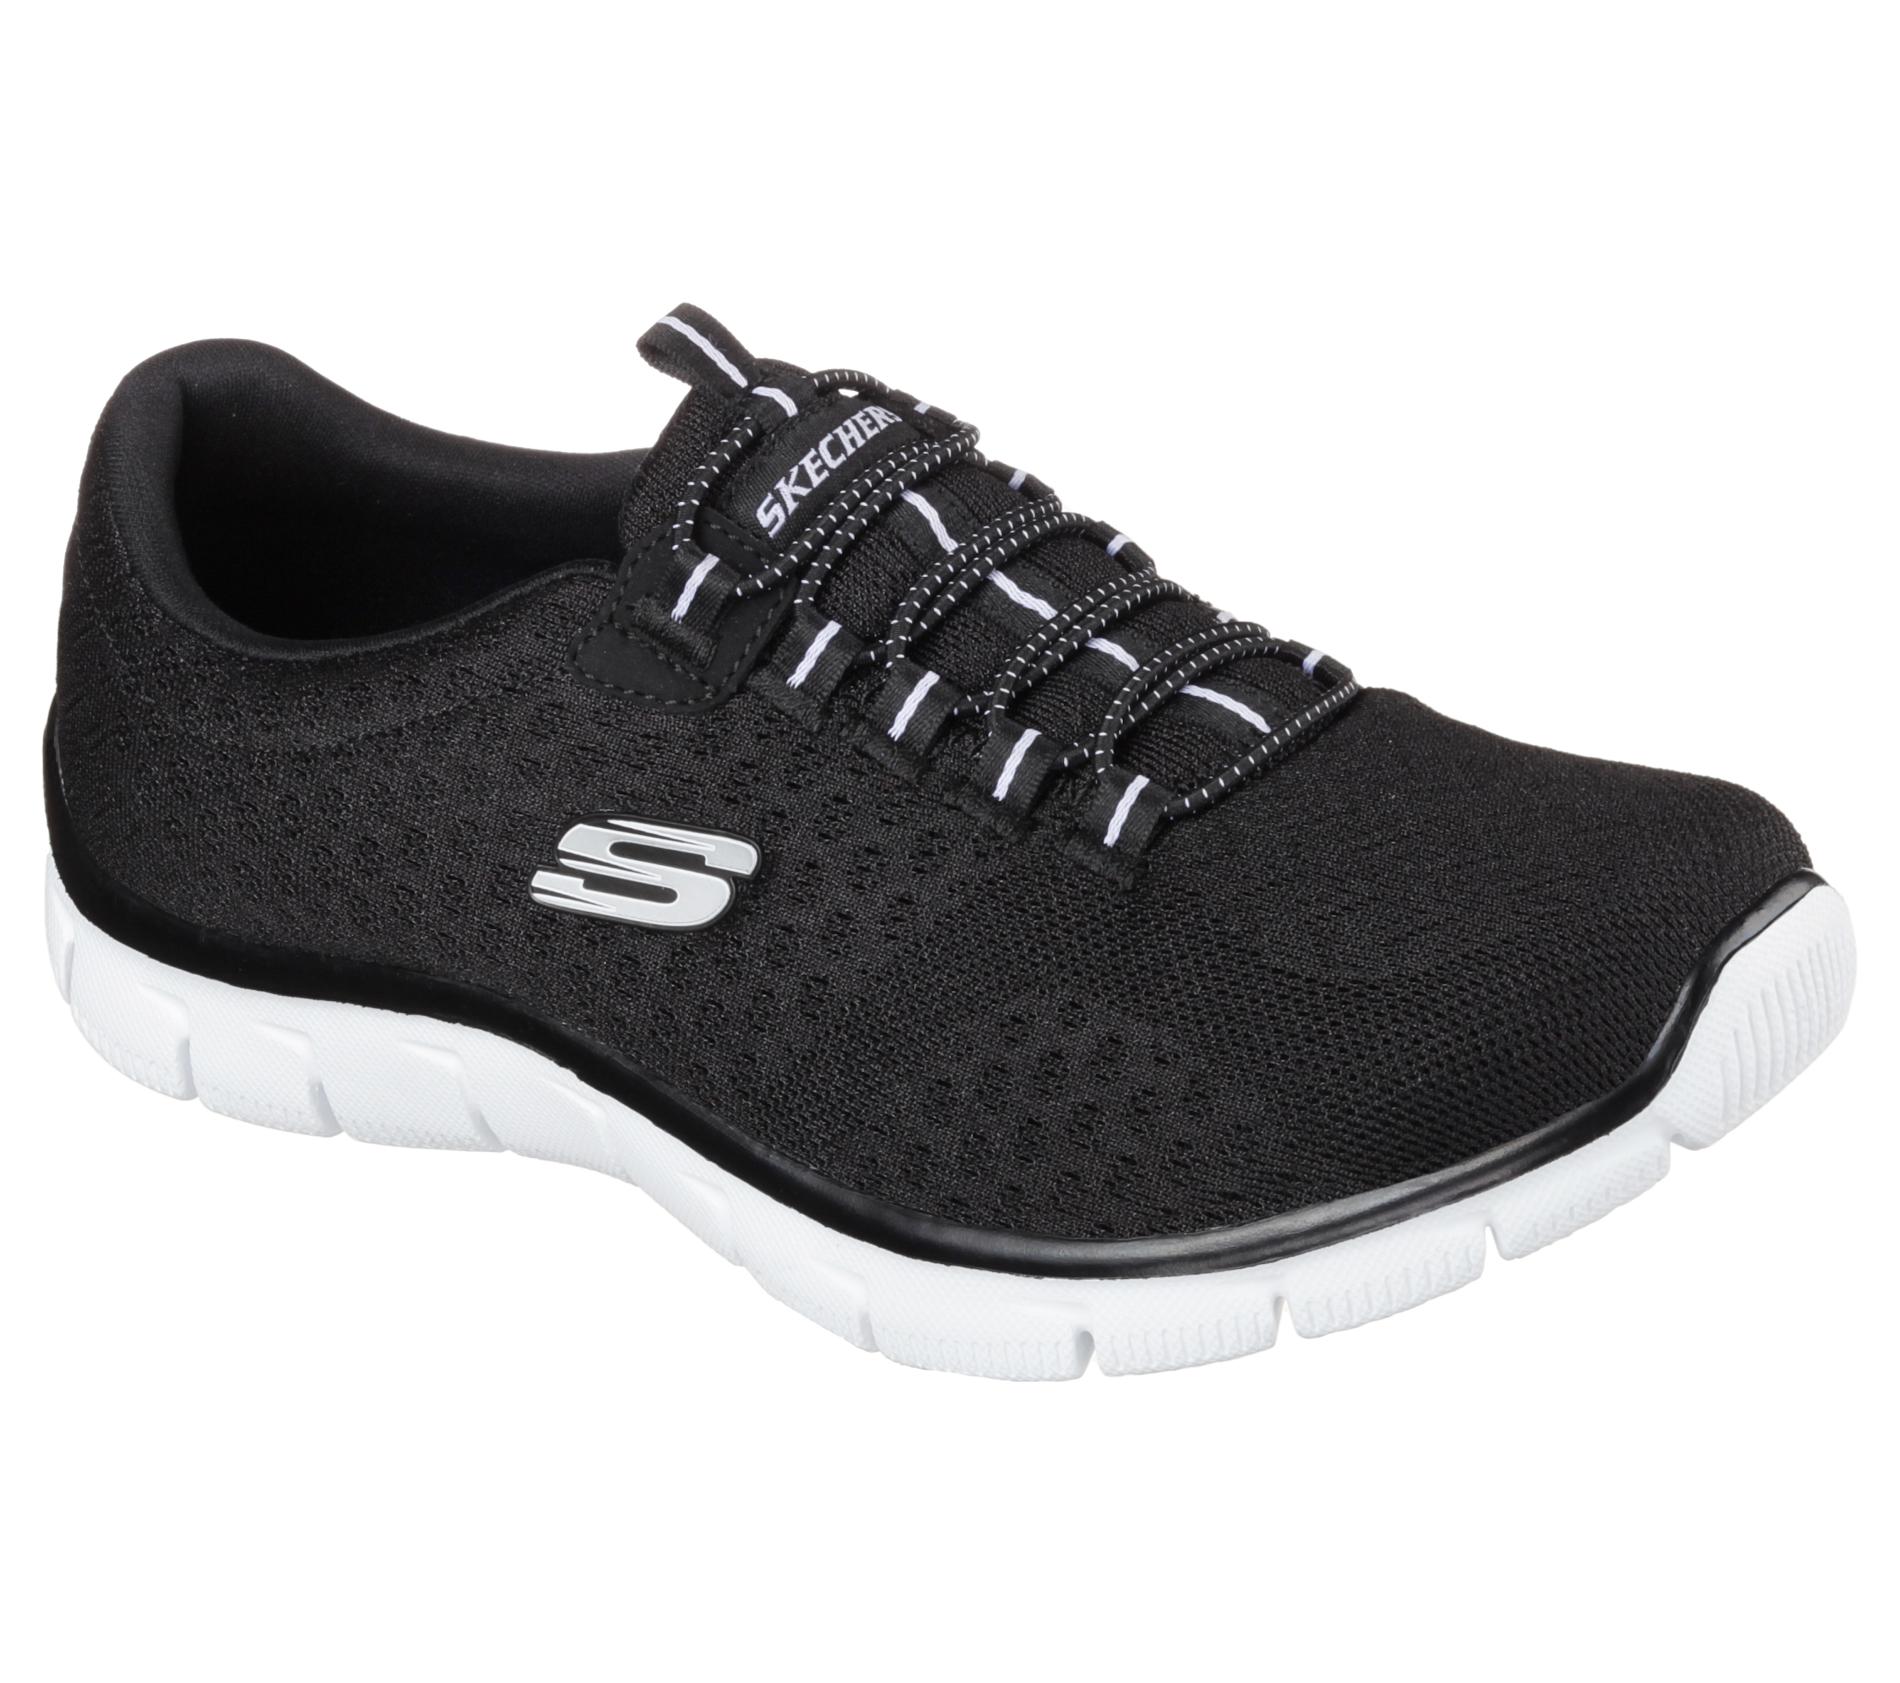 Skechers Women's Relaxed Fit Stealing Glances Athletic ...